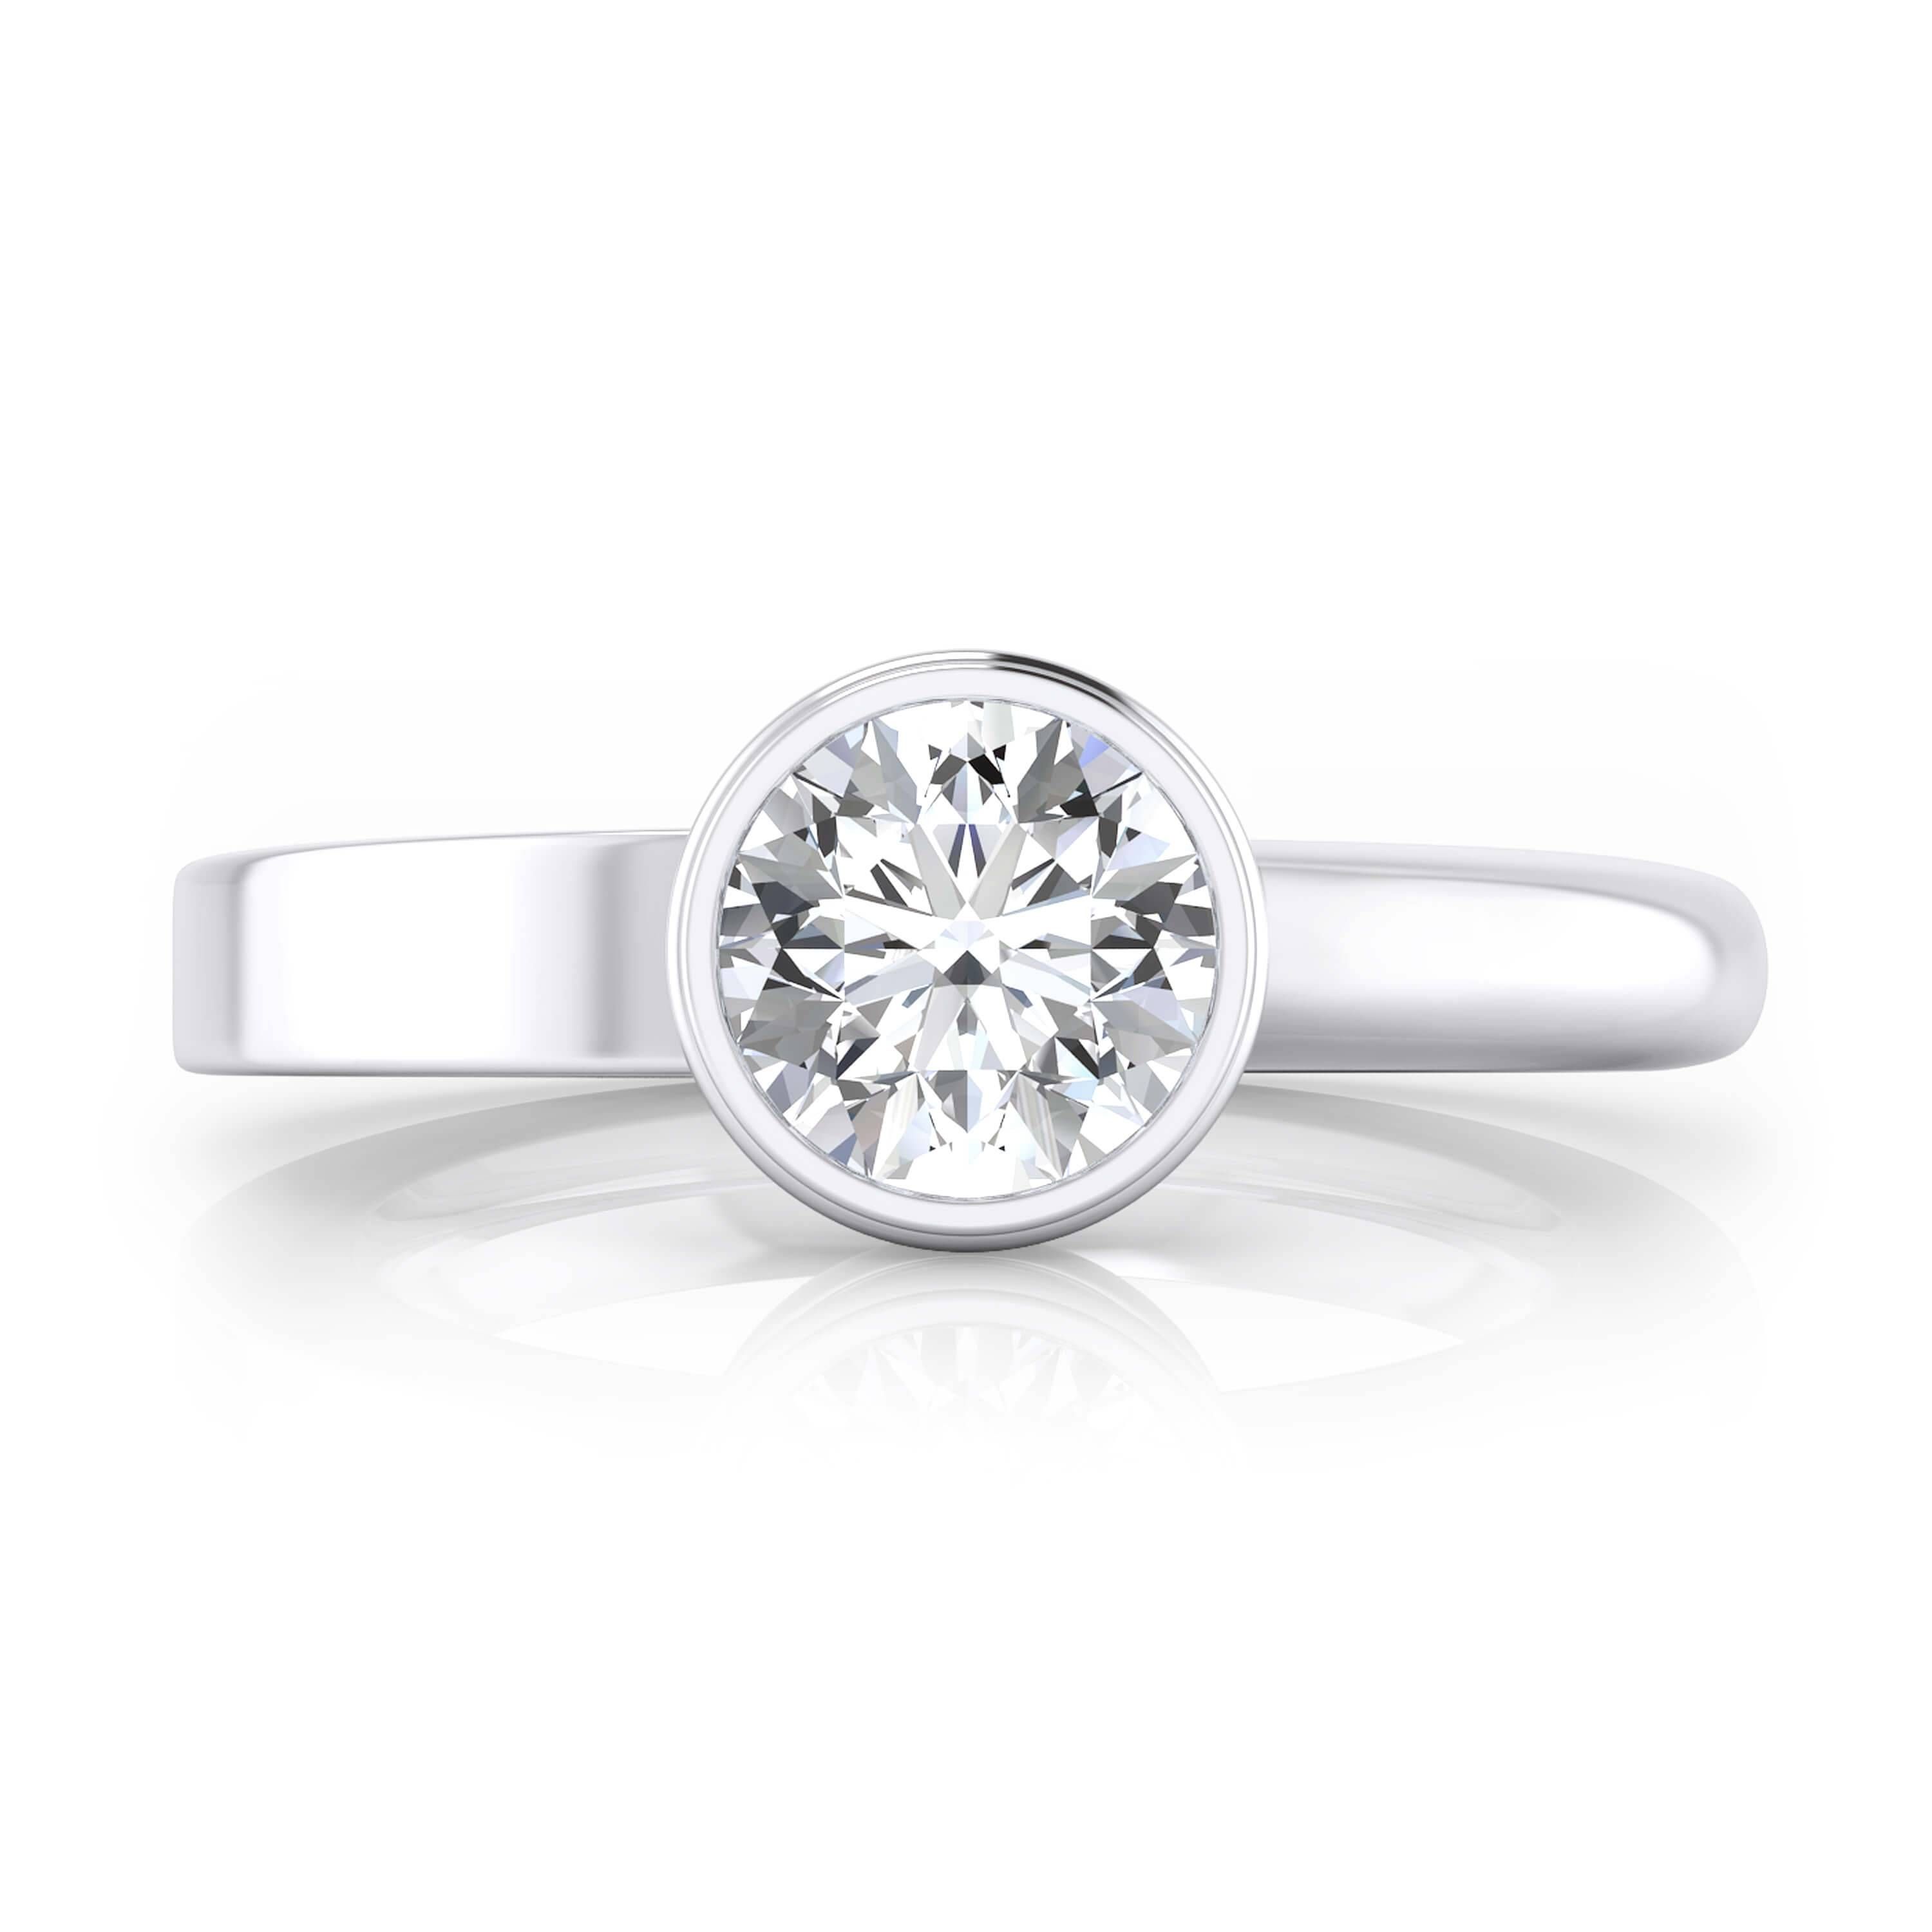 Engagement Rings – 18k White Gold | Jewellery Online Inside Flat Engagement Ring Settings (View 11 of 15)